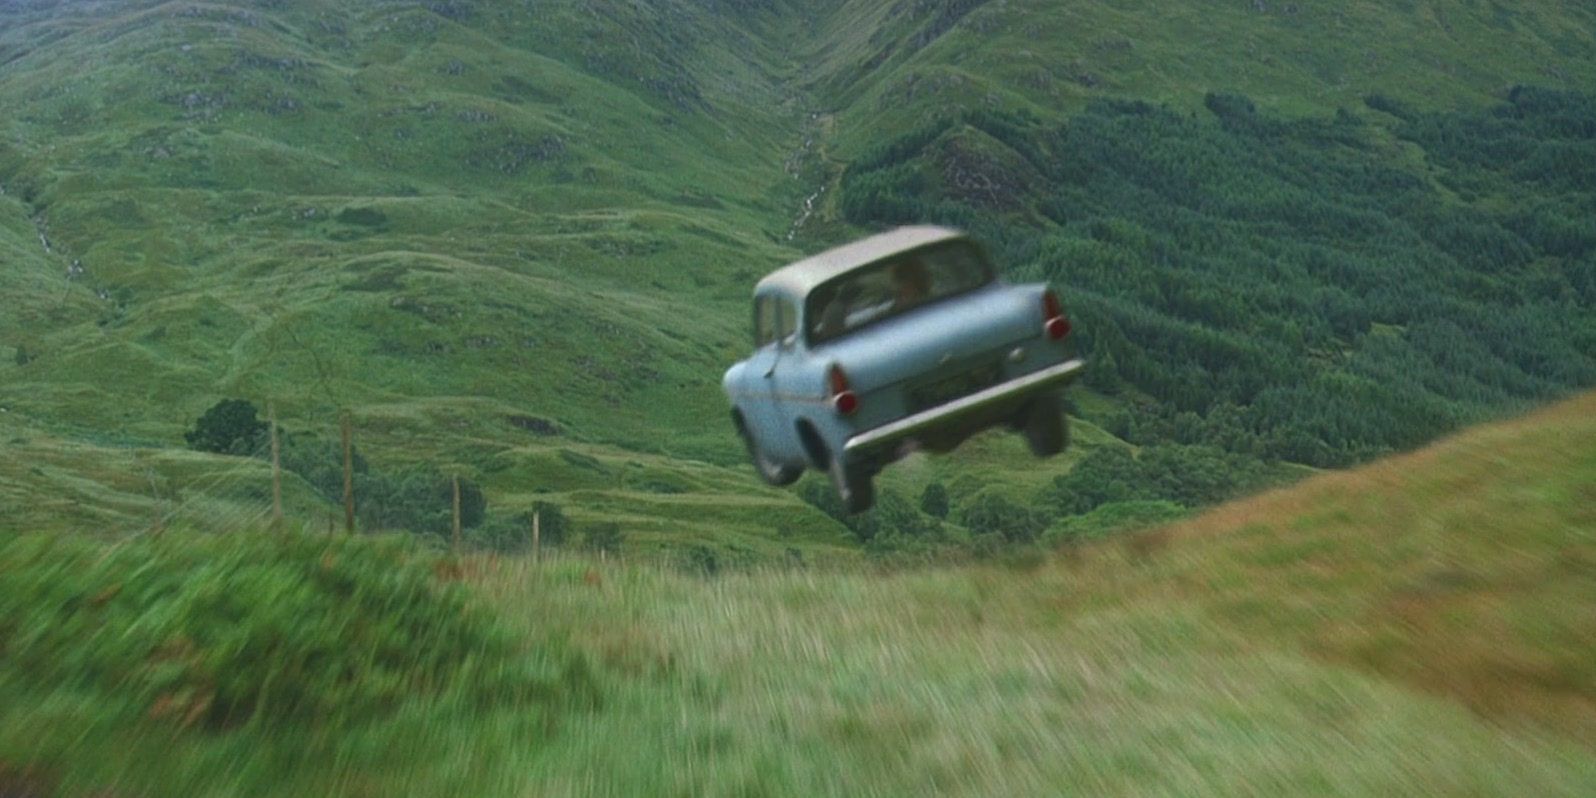 The ford anglia flies over the hills in Harry Potter